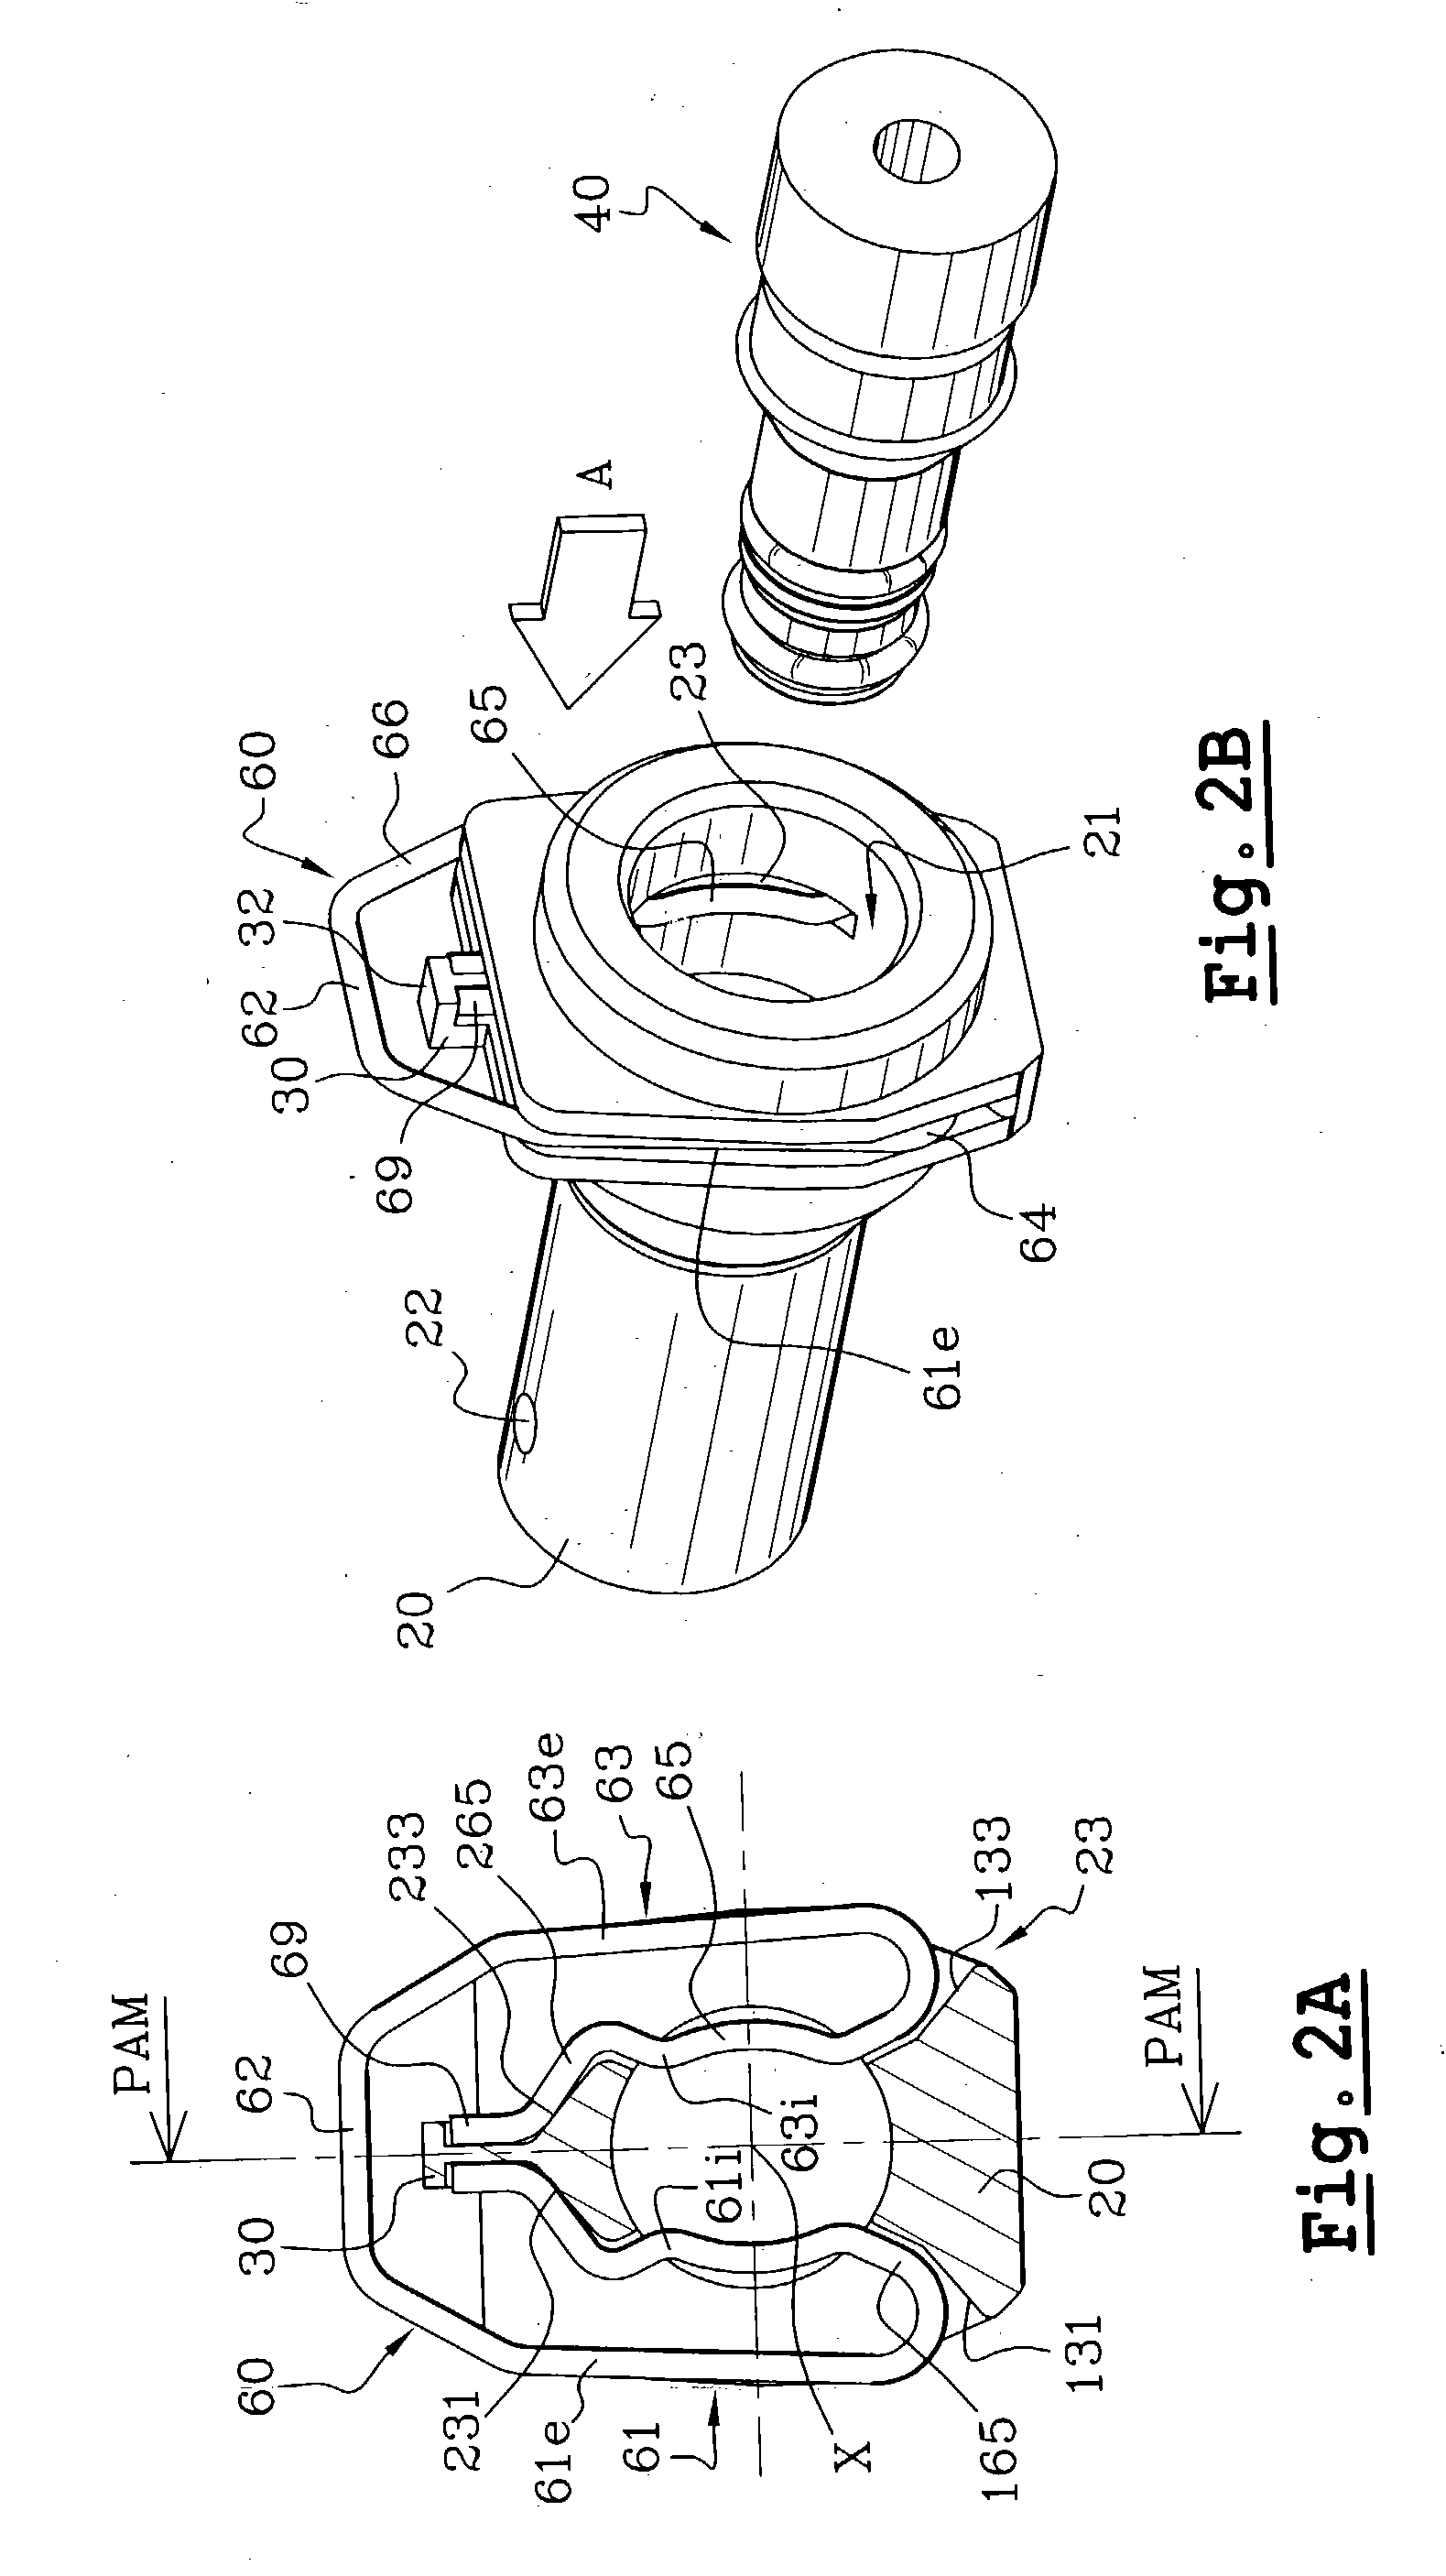 Feed pipe coupling for a pressurised fluid system